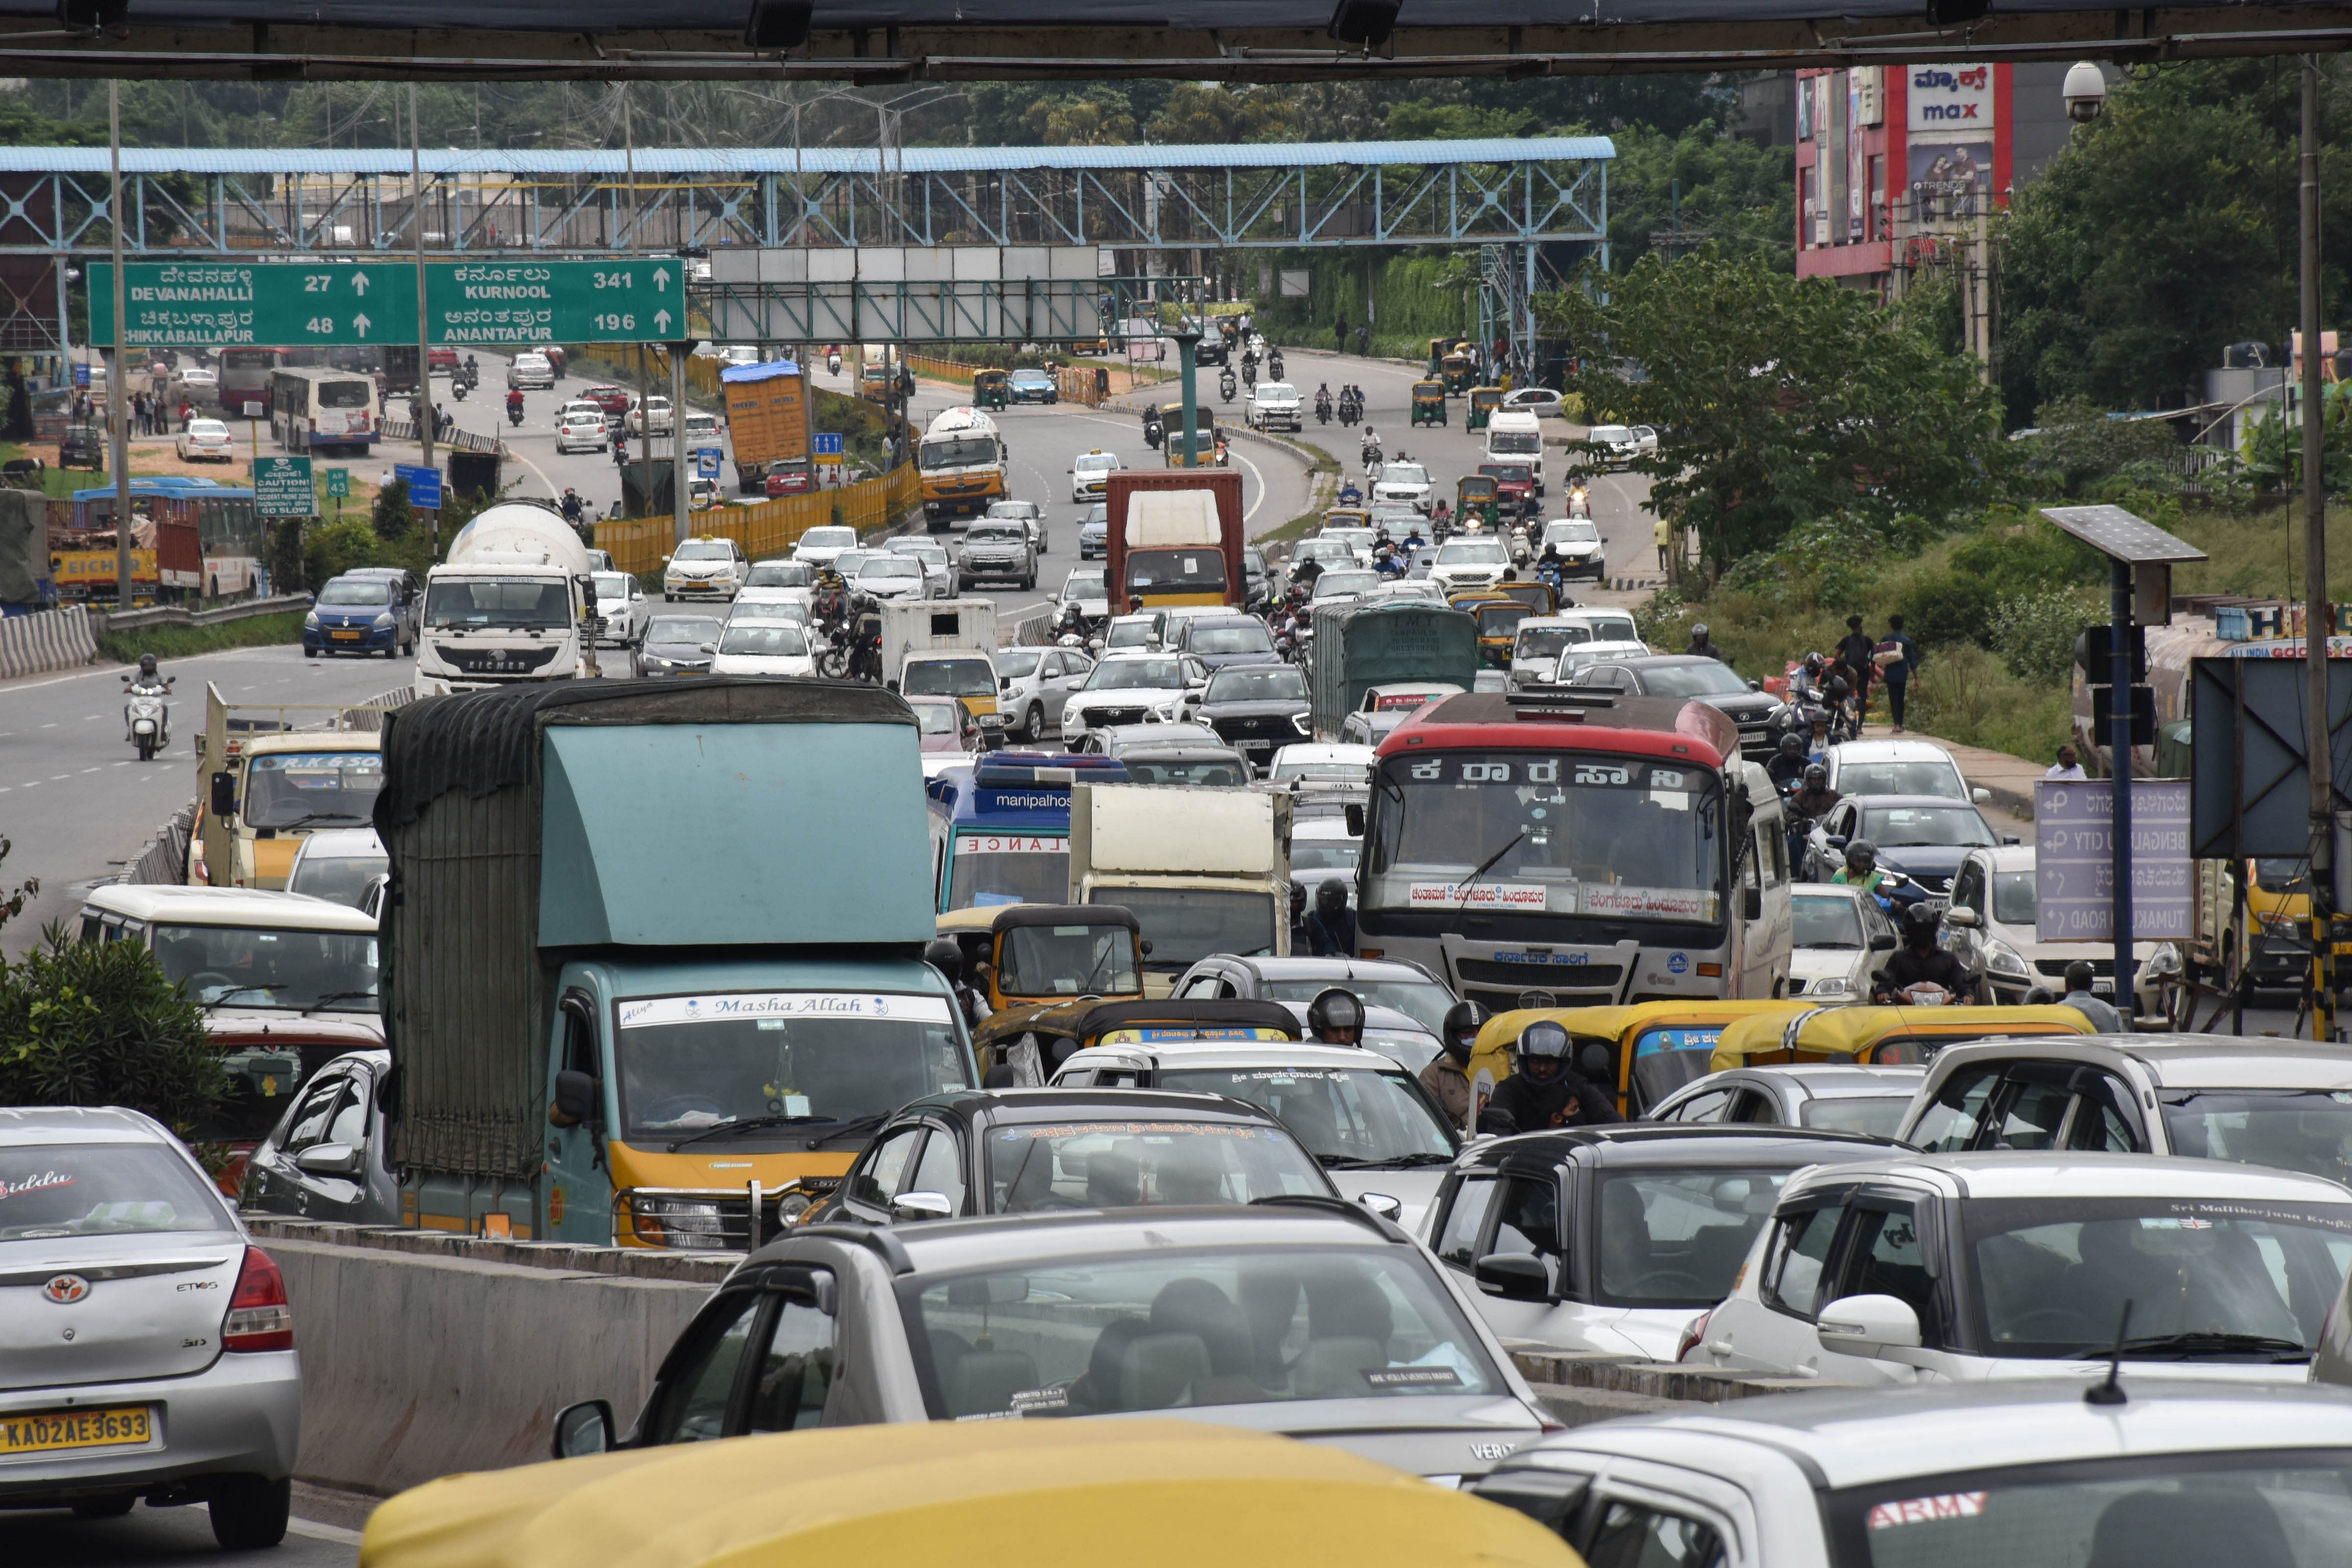 The city has been investing in flyovers, road widening and junction improvement projects, but this has only resulted in more congestion. Credit: DH Photo